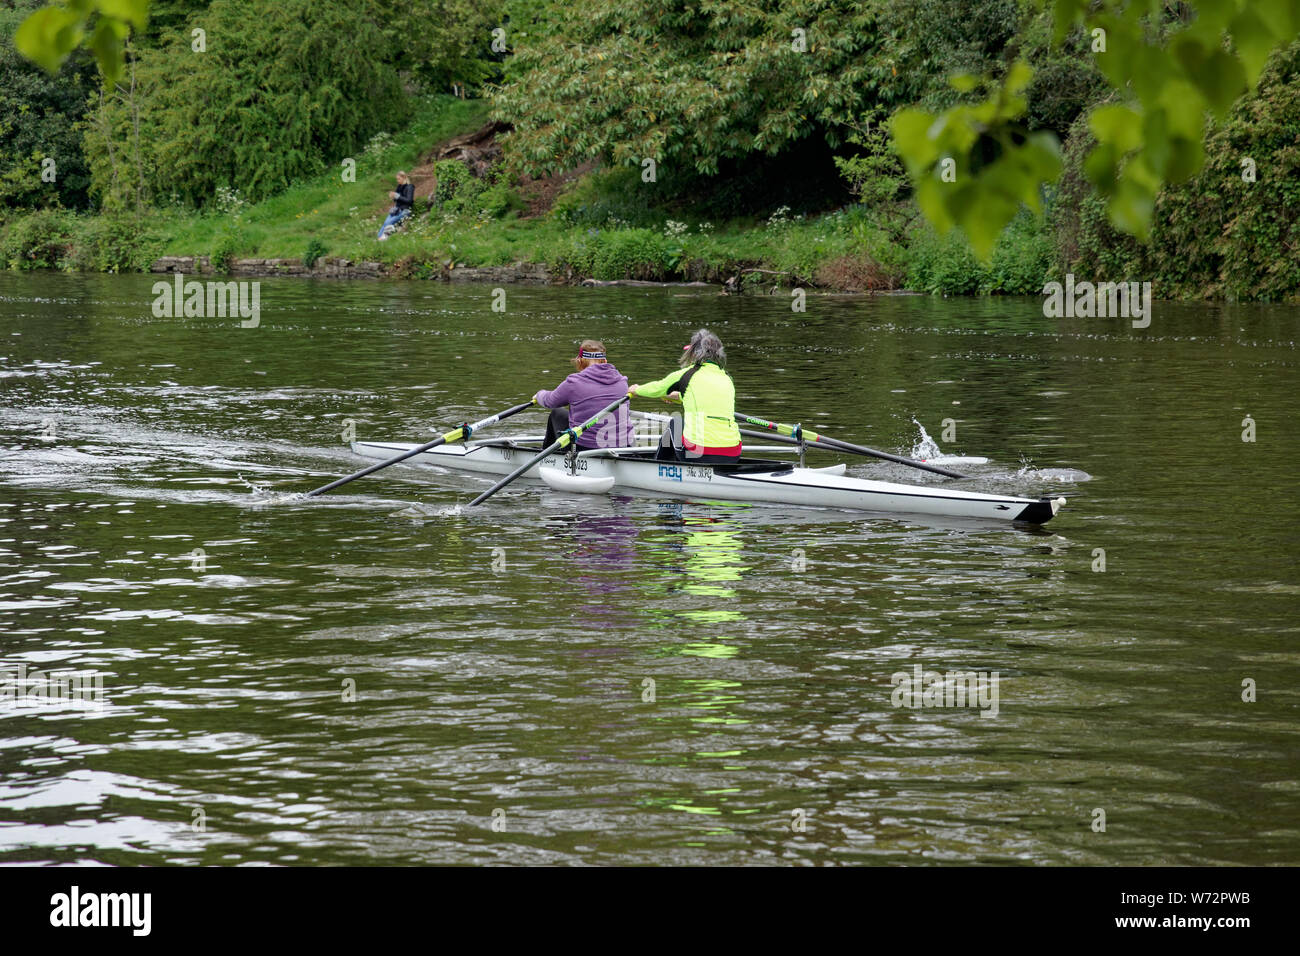 Rowers in training on the river Avon in Stratford Upon Avon on a Double Scull type craft Stock Photo